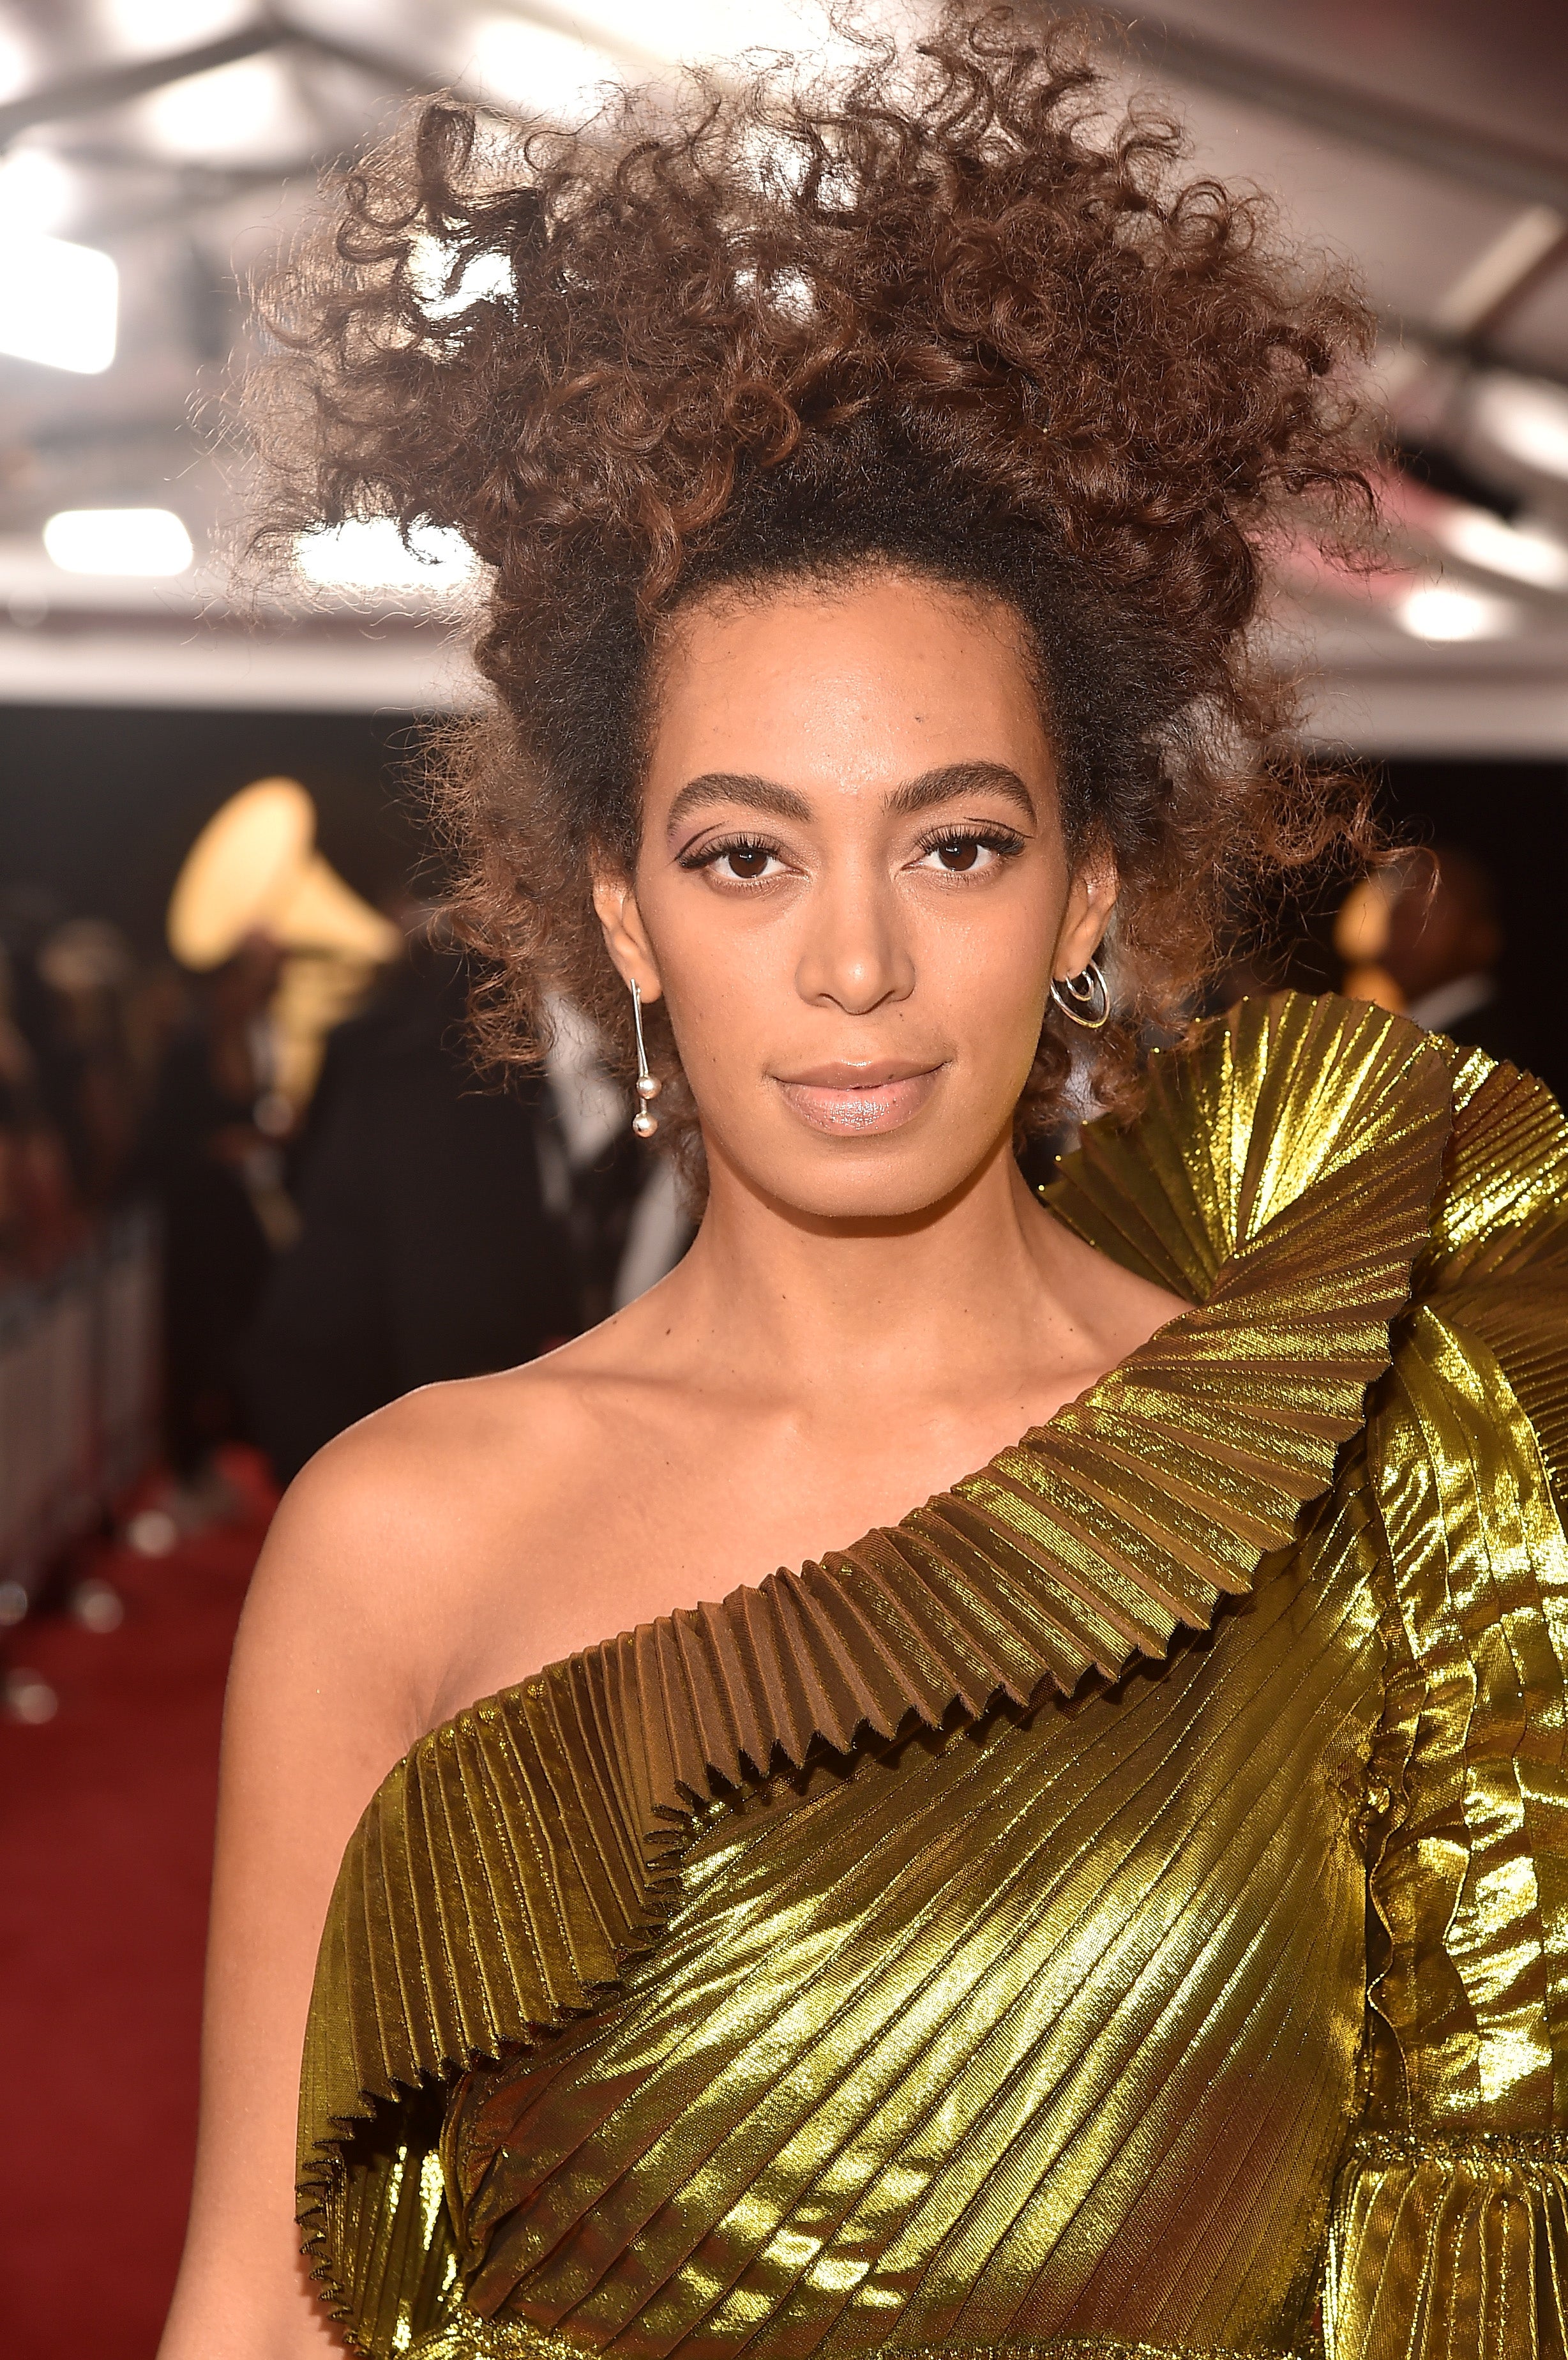 The Best Beauty and Hair Looks From The 2017 Grammy Awards